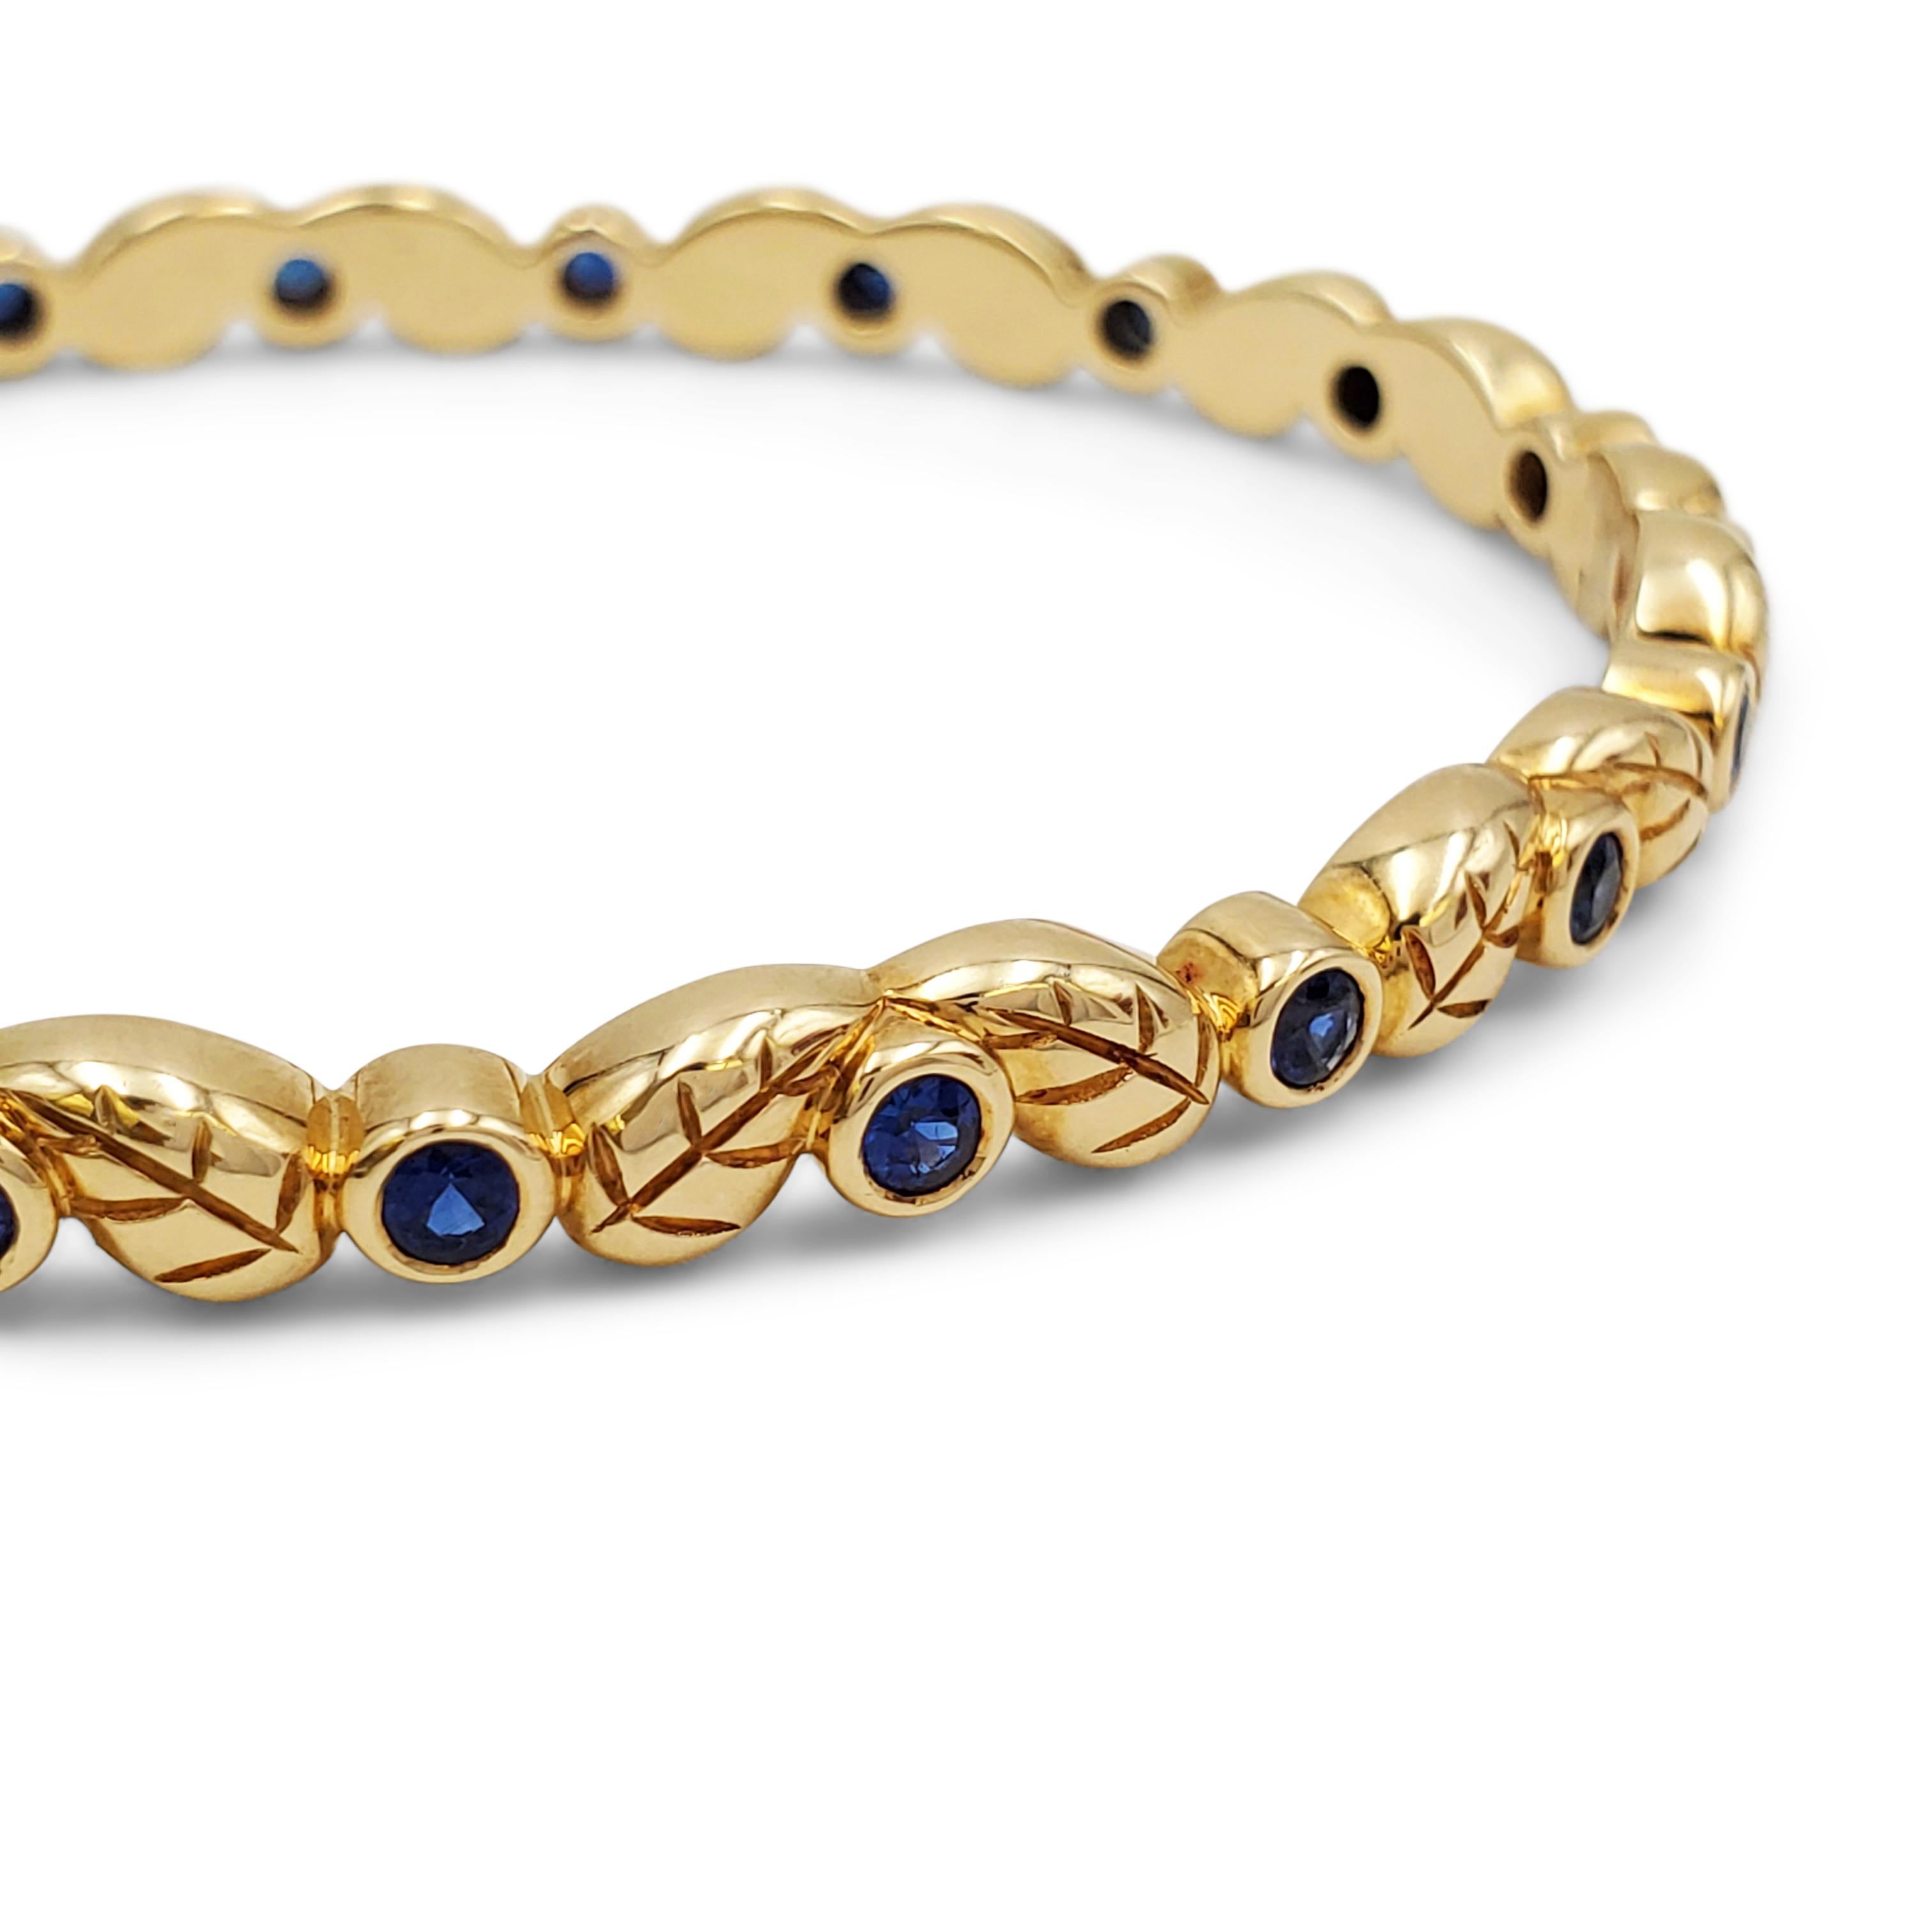 Authentic Temple St. Clair bracelet crafted in 18 karat gold.  A pattern of carved leaves is accented by lively bezel-set sapphires of an estimated 1 carat total weight. The bracelet has a 6 3/4 inch internal circumference and measures 5mm in width.